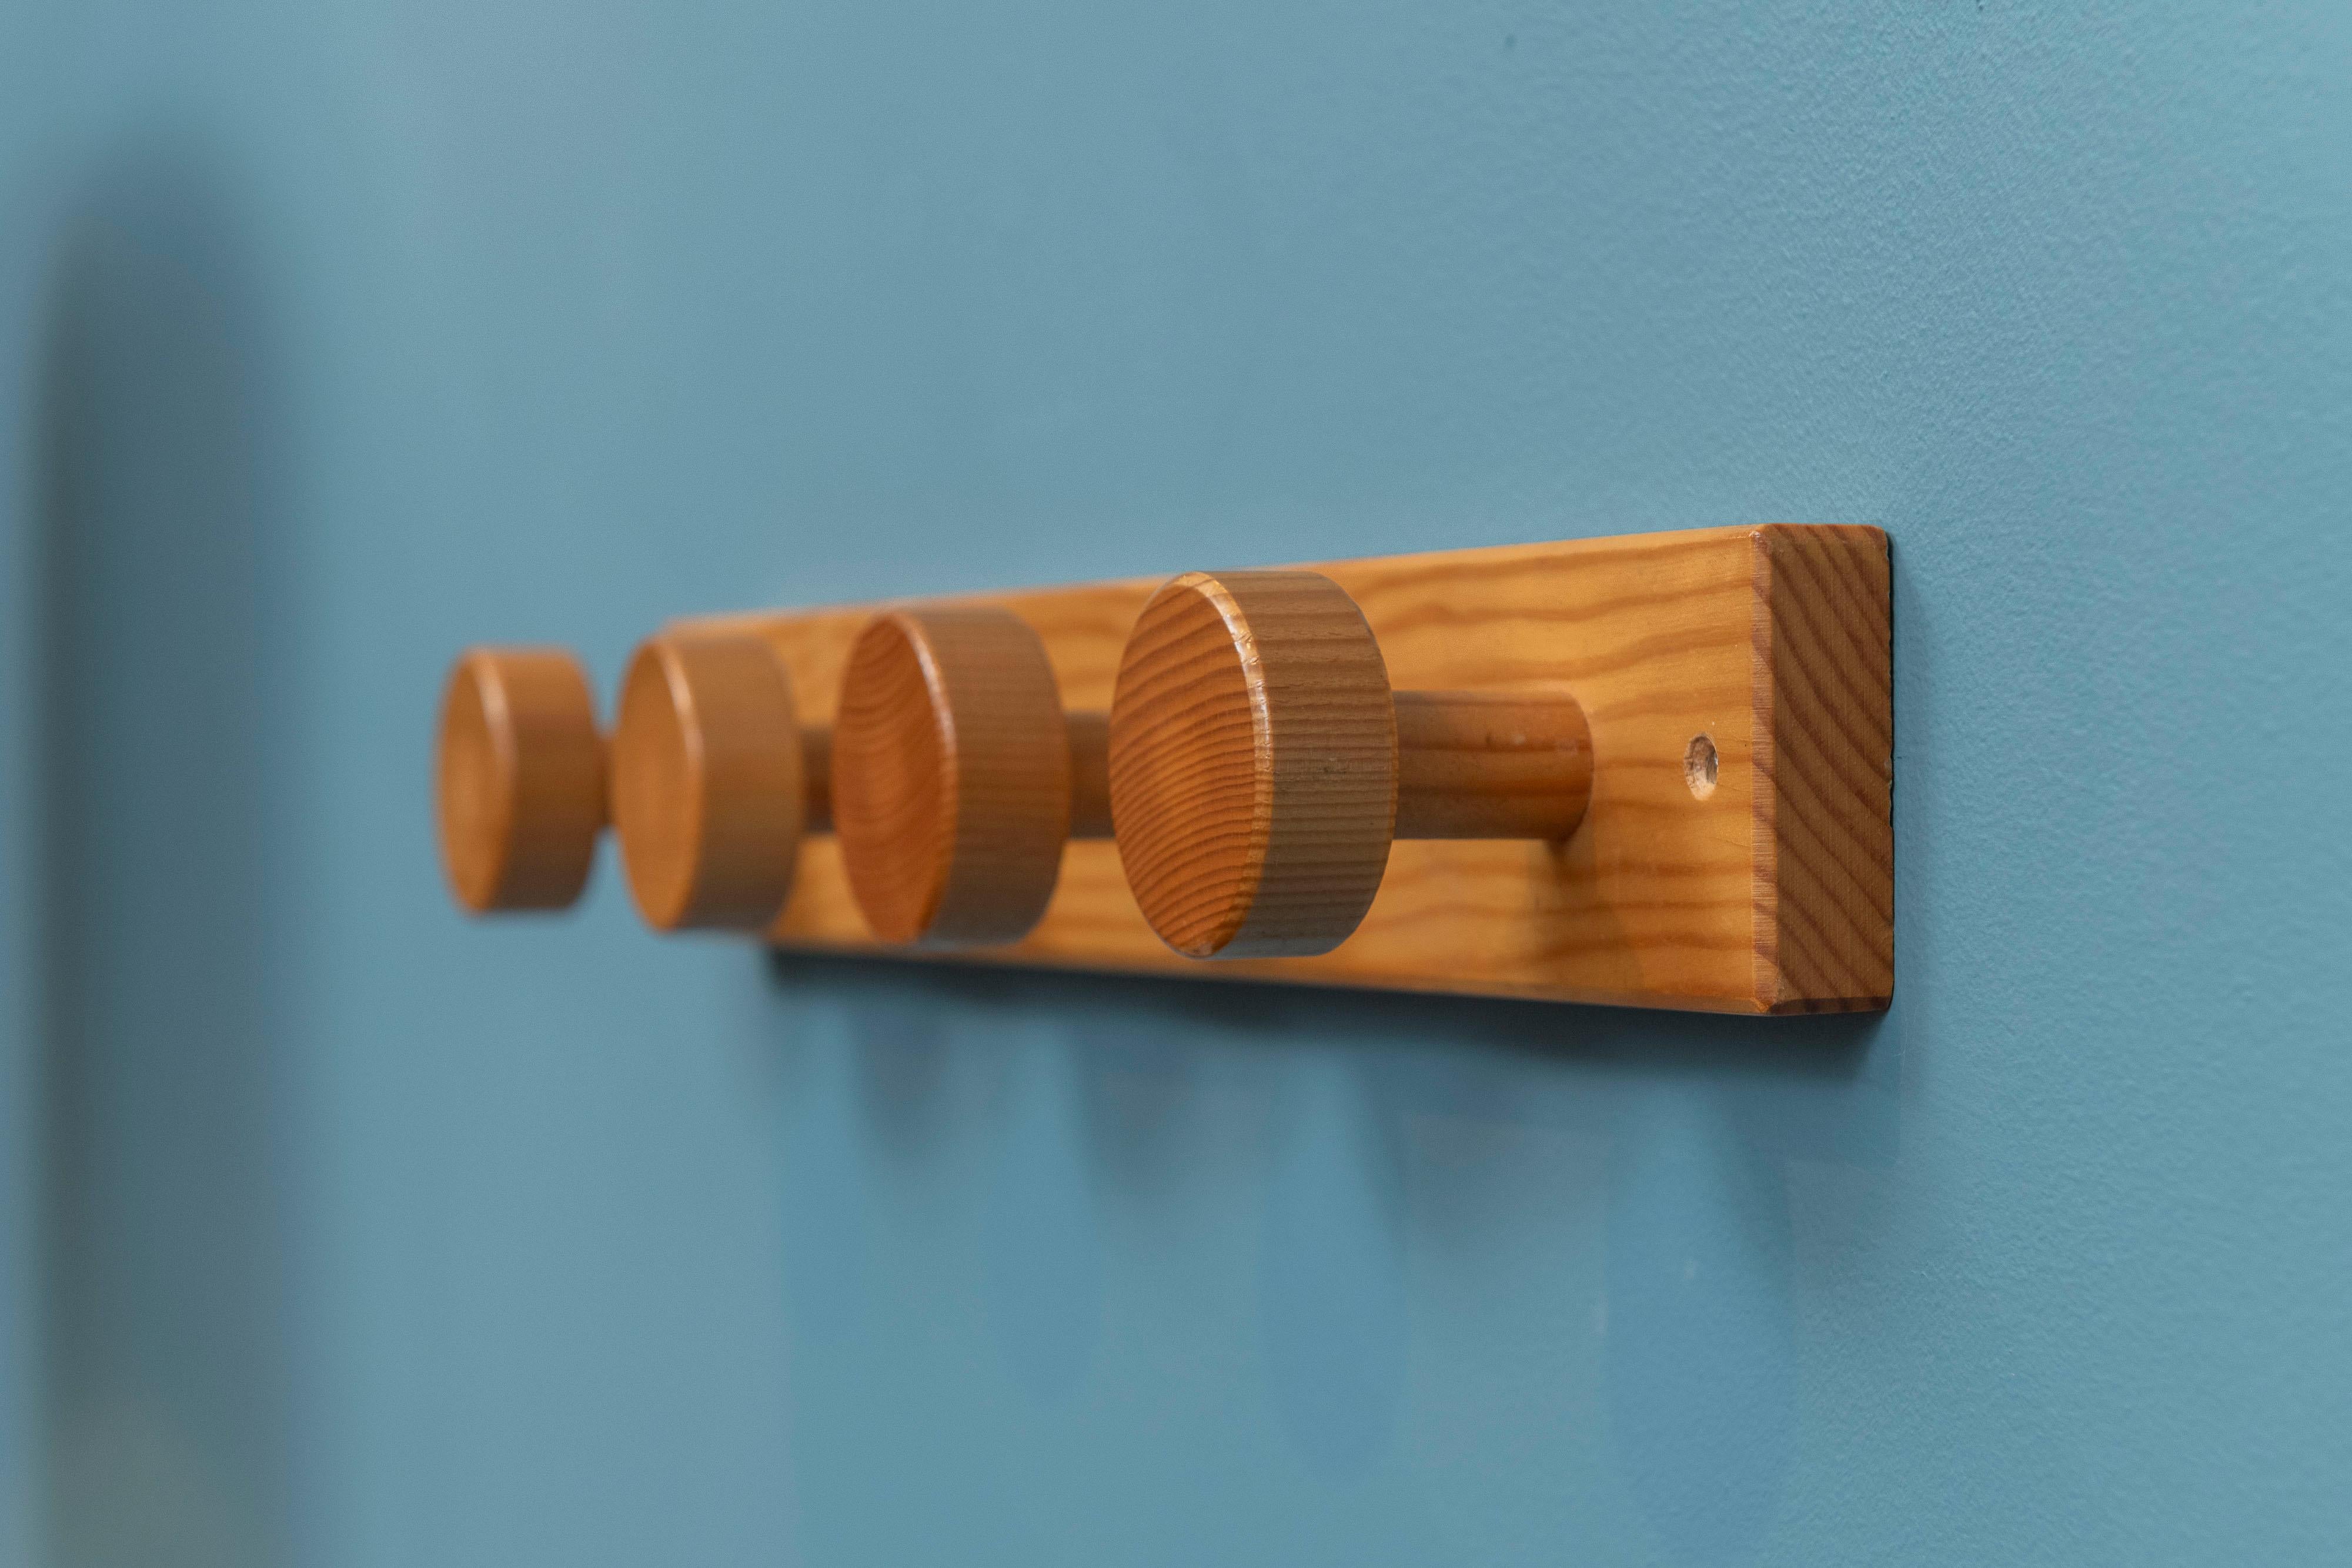 Mid-Century modern coat rack in the style of Charlotte Perriand's Les Arcs project, France. In very good original condition, requiring just two screws to hang. Made from turned pine, ready to install and enjoy.